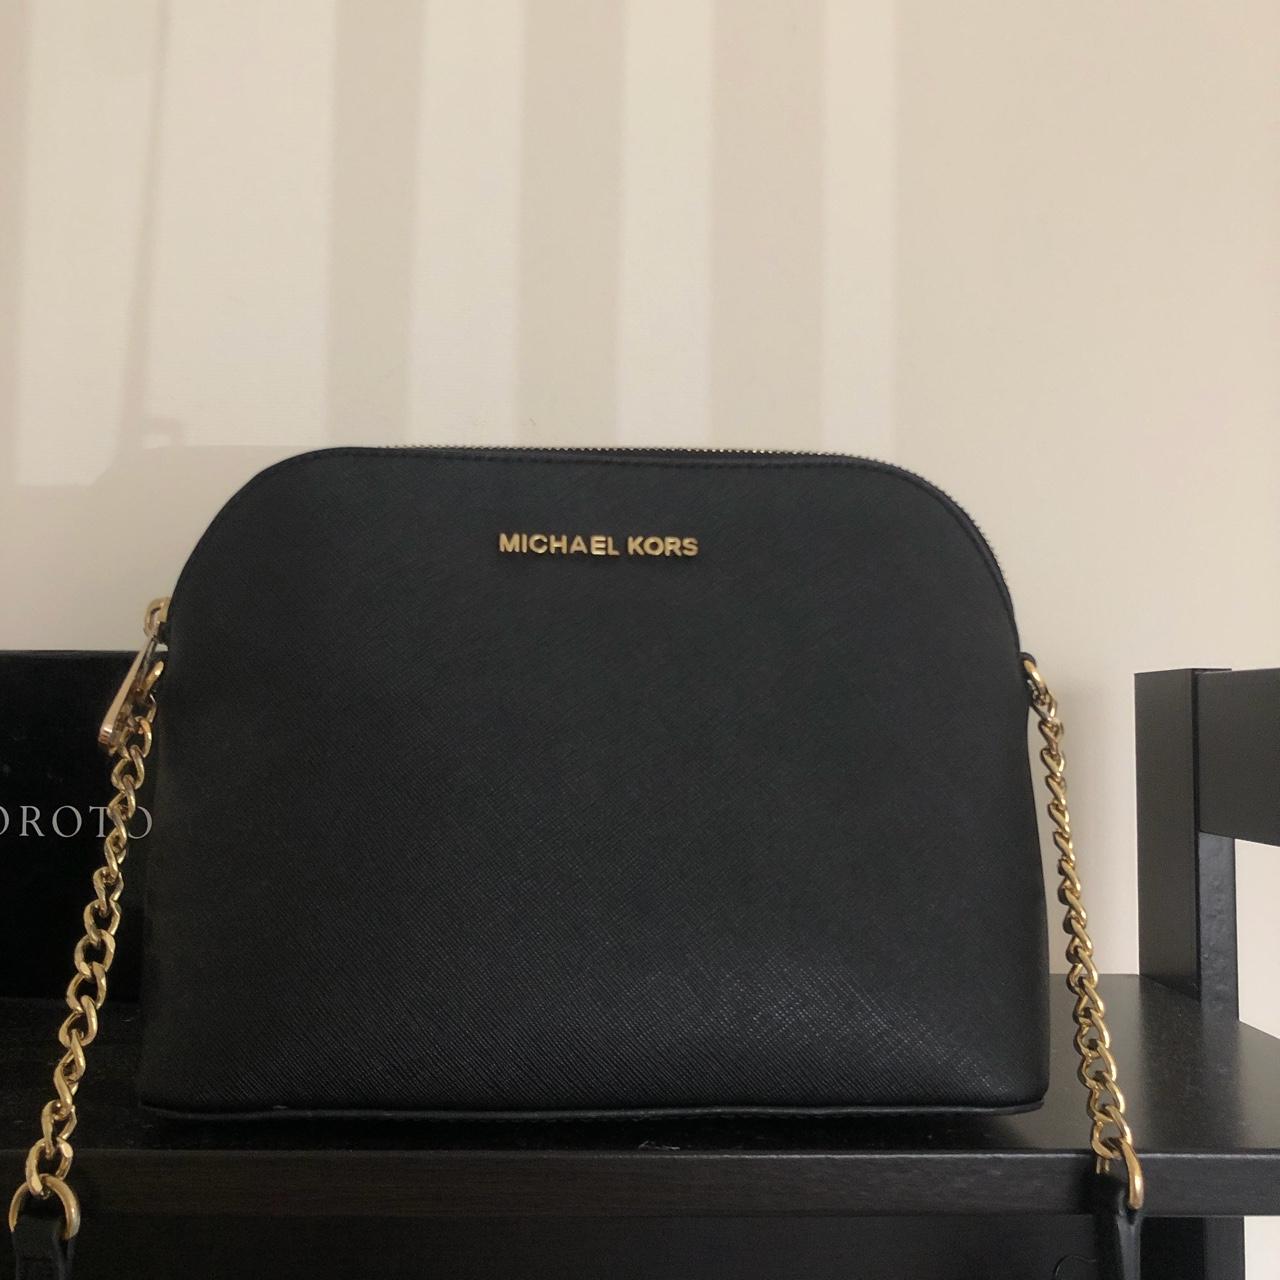 PM FOR SHIPPING} Authentic Michael Kors cindy dome - Depop